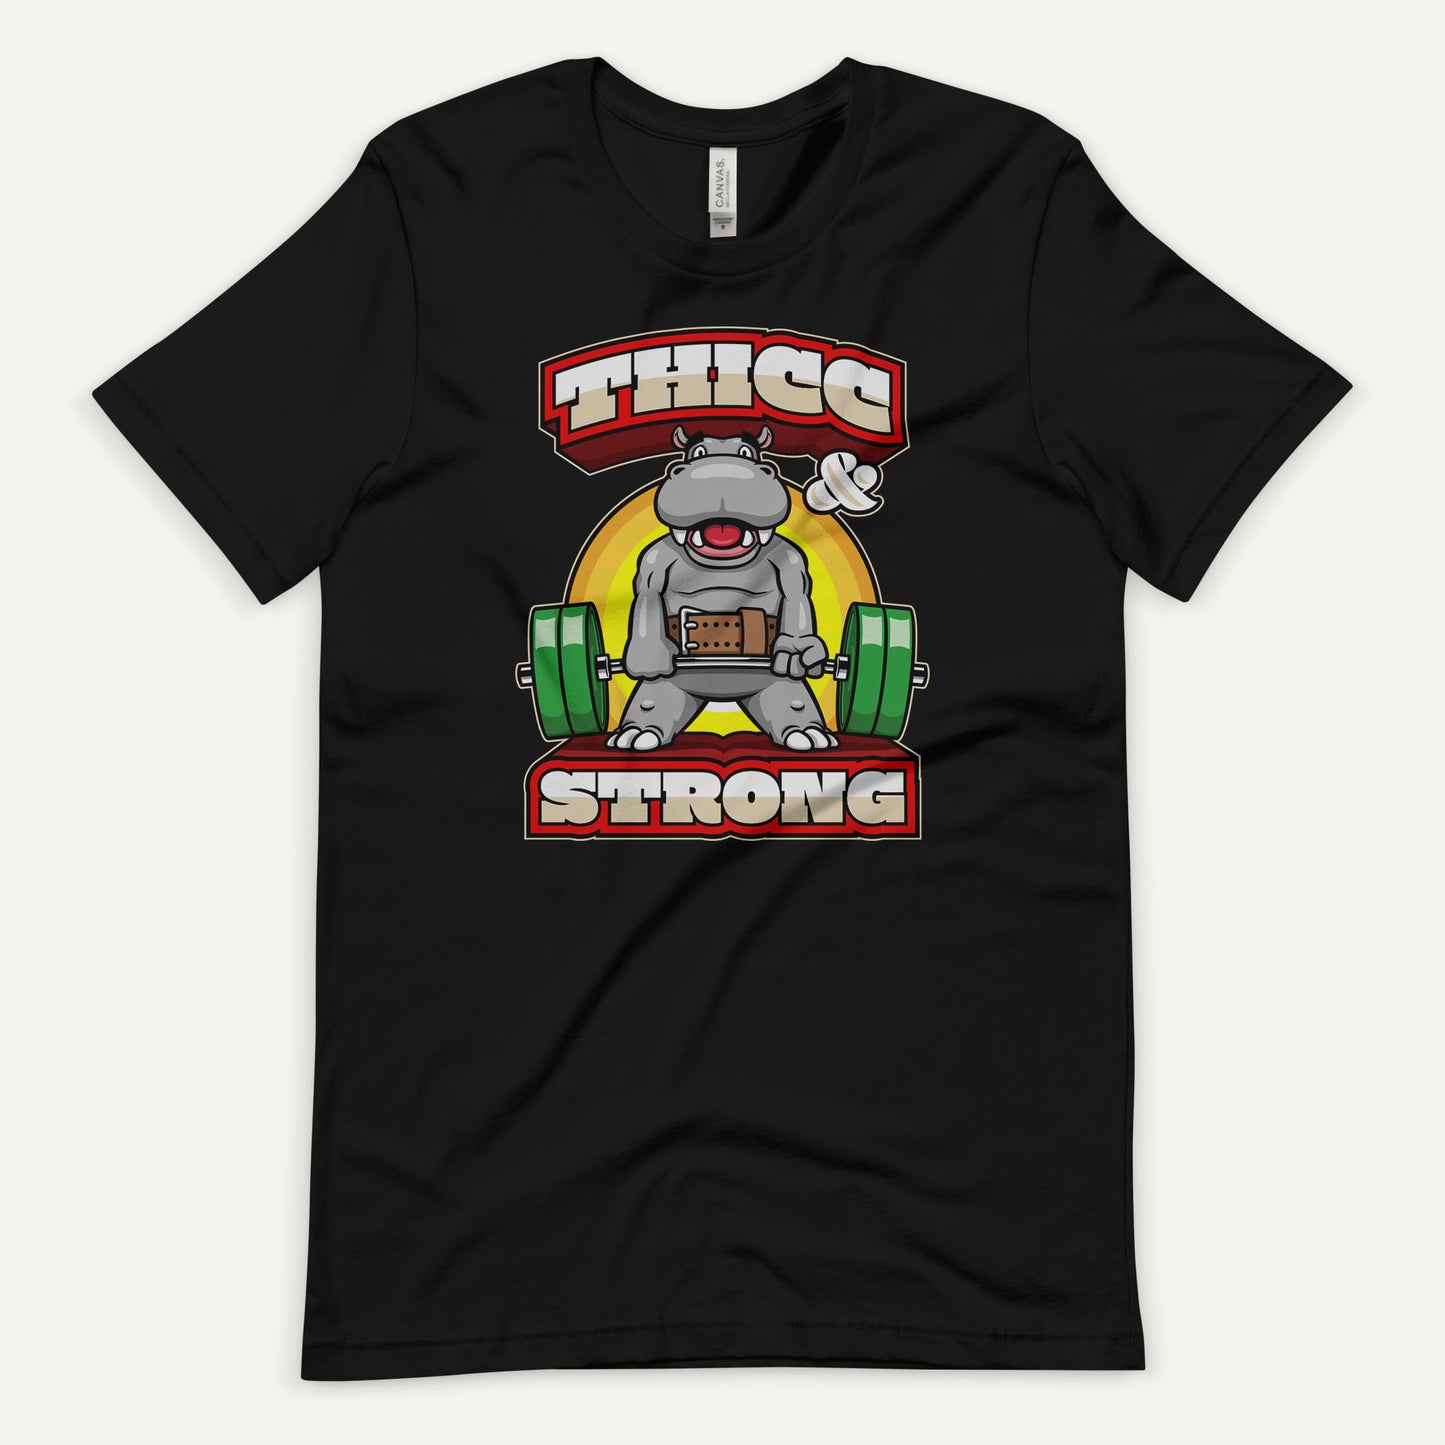 Thicc And Strong Men’s Standard T-Shirt